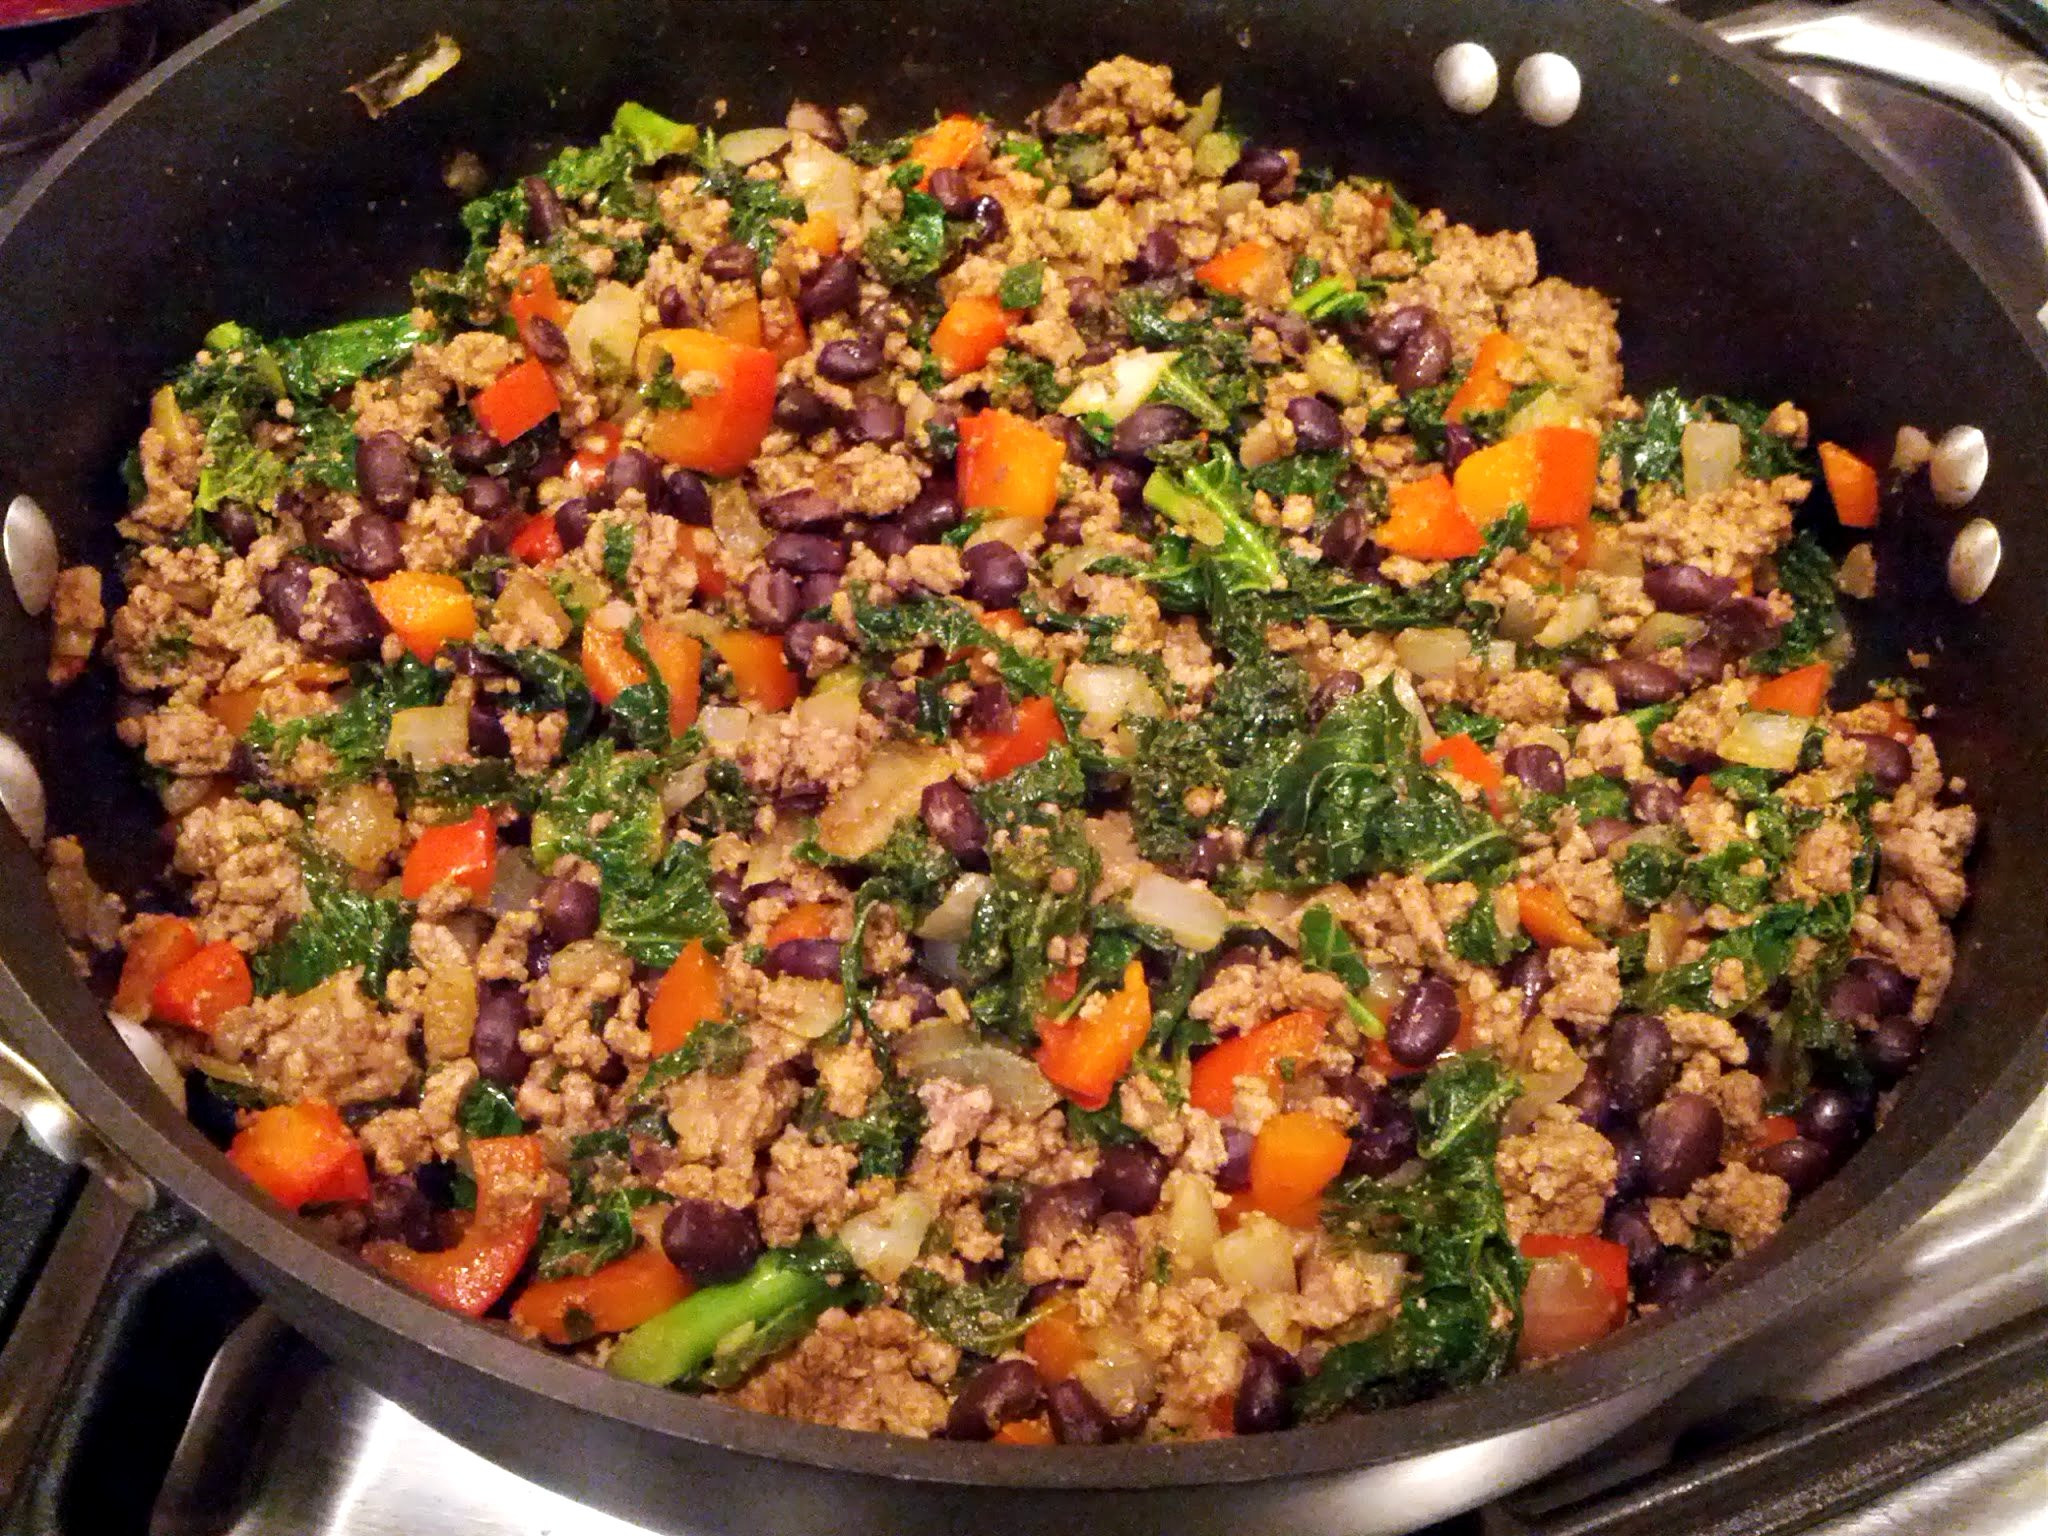 Recipes Using Ground Chicken
 Kale and Ground Beef Turkey Taco Filling